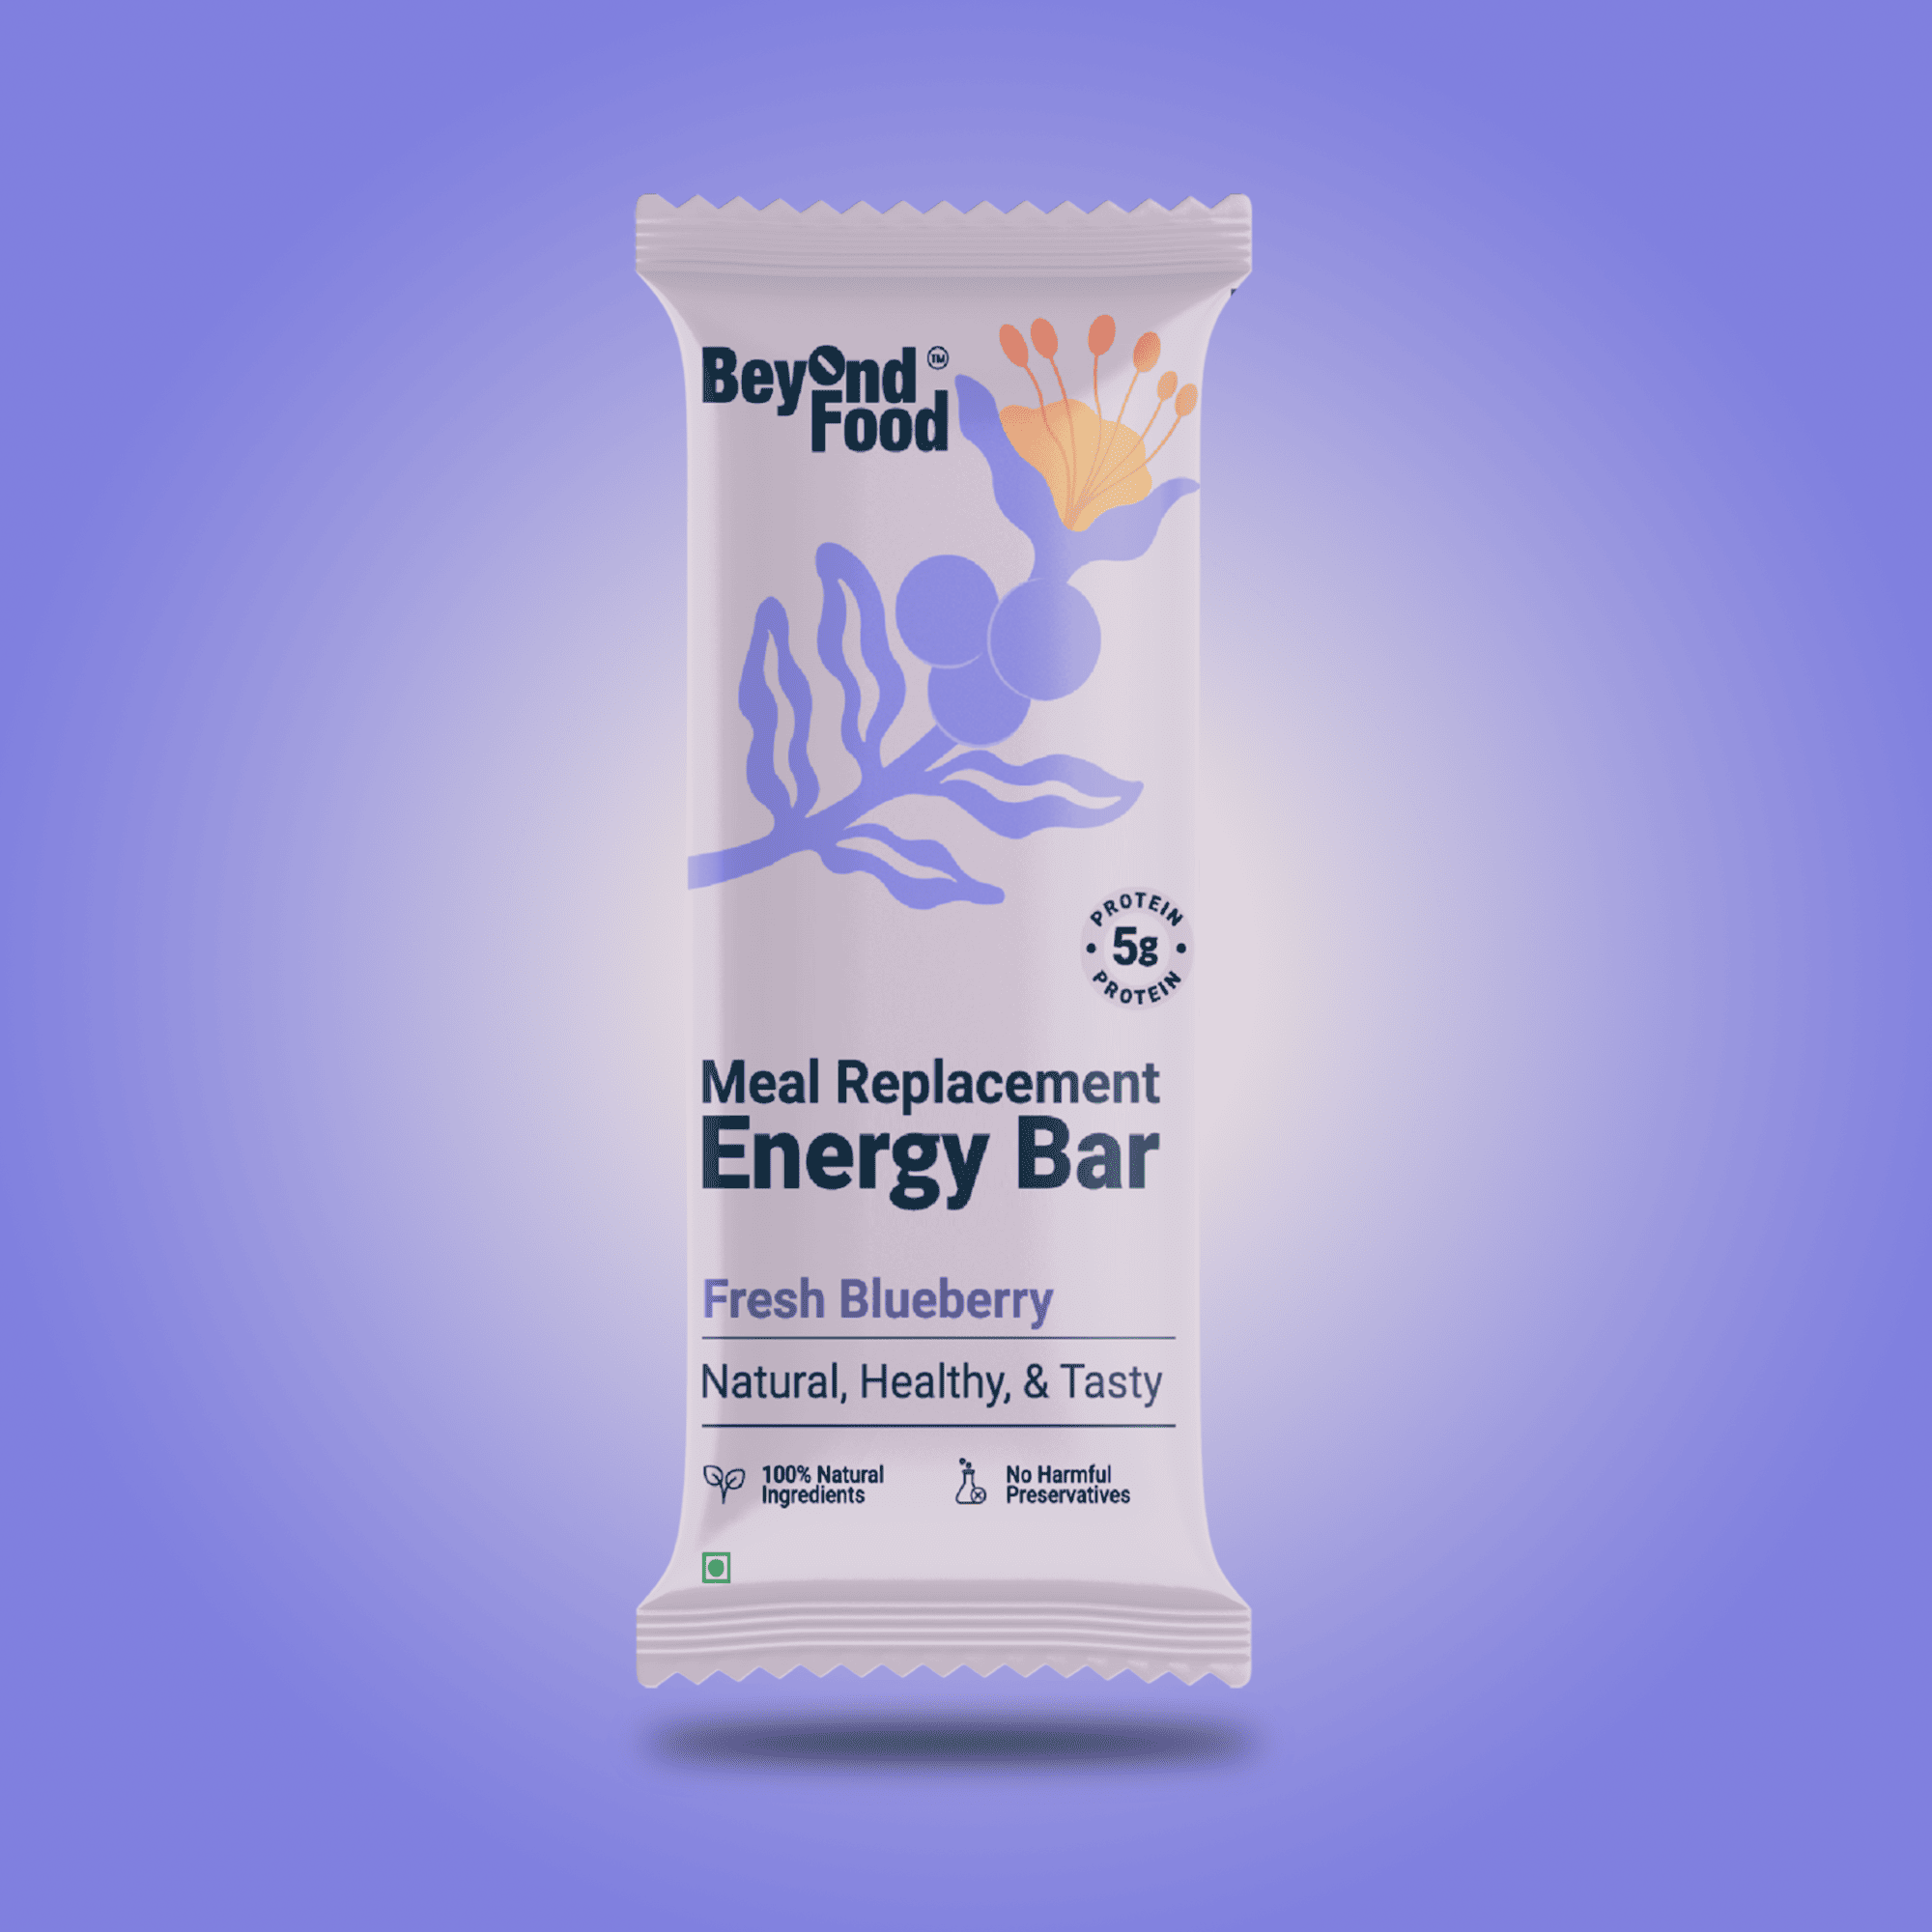 Beyond Food Meal Replacement Energy Bars - Fresh Blueberry | Pack of 6 | 6x50g